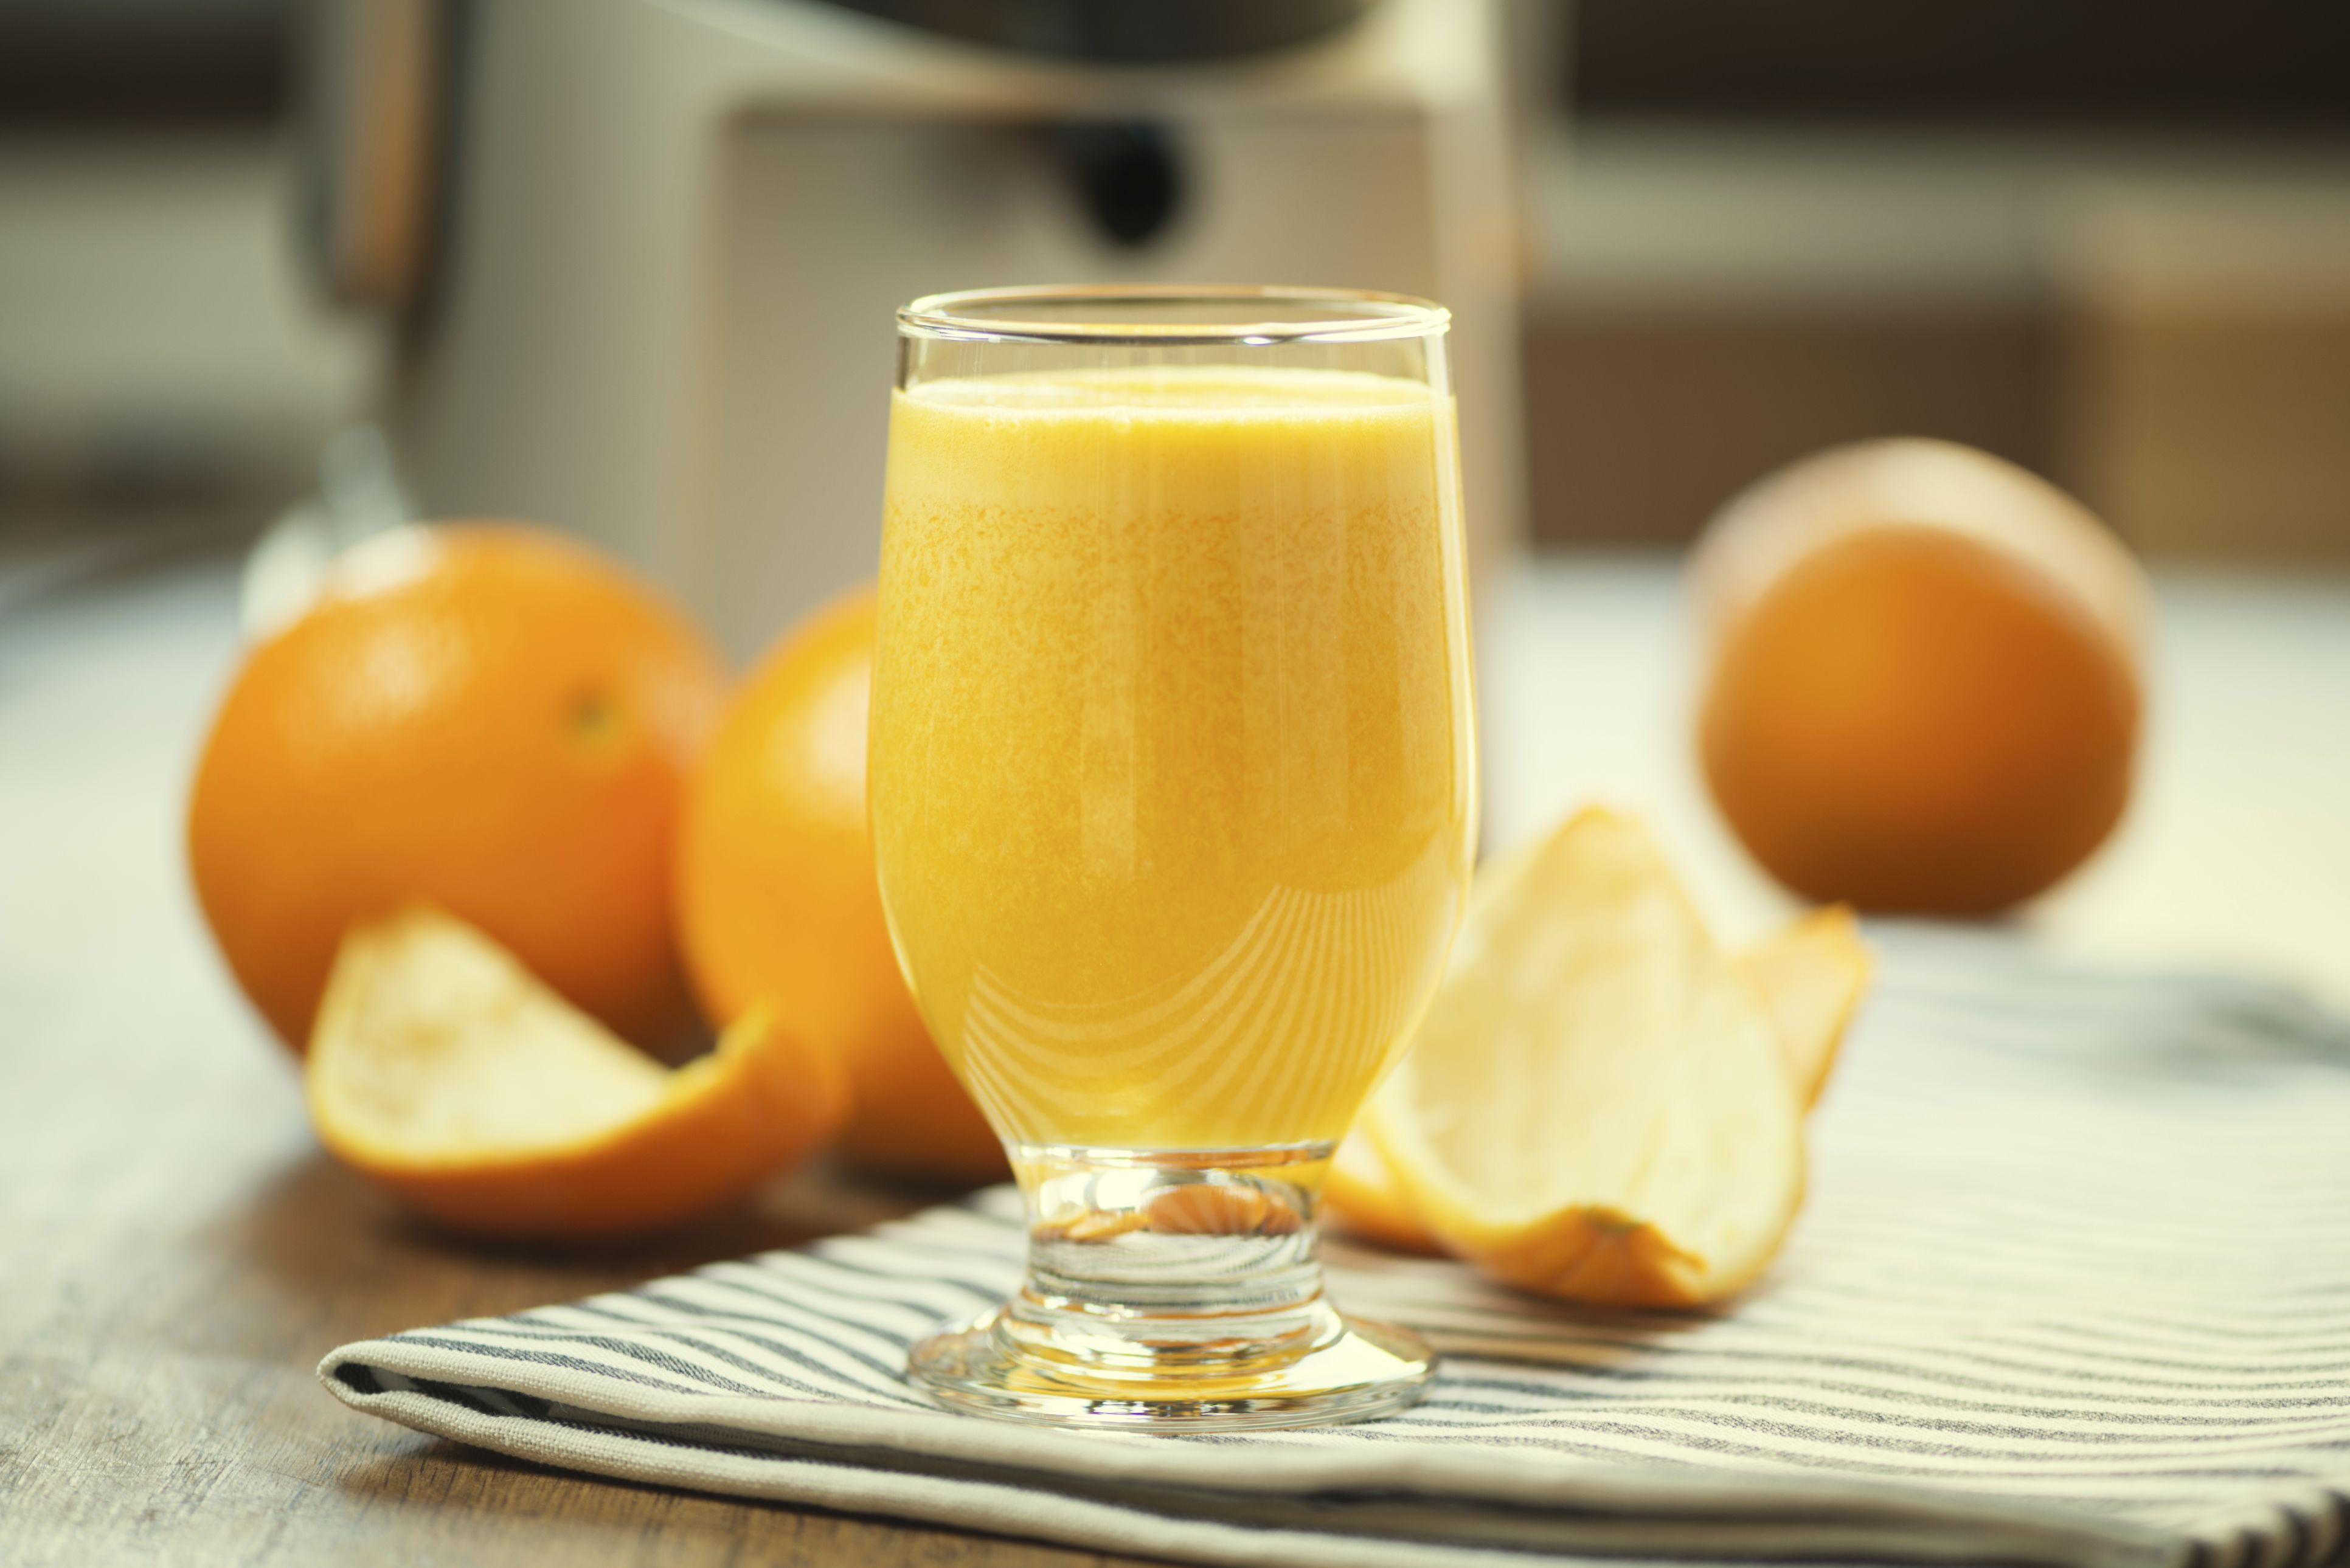 Drinking fruit juice may raise cancer risk, study claims